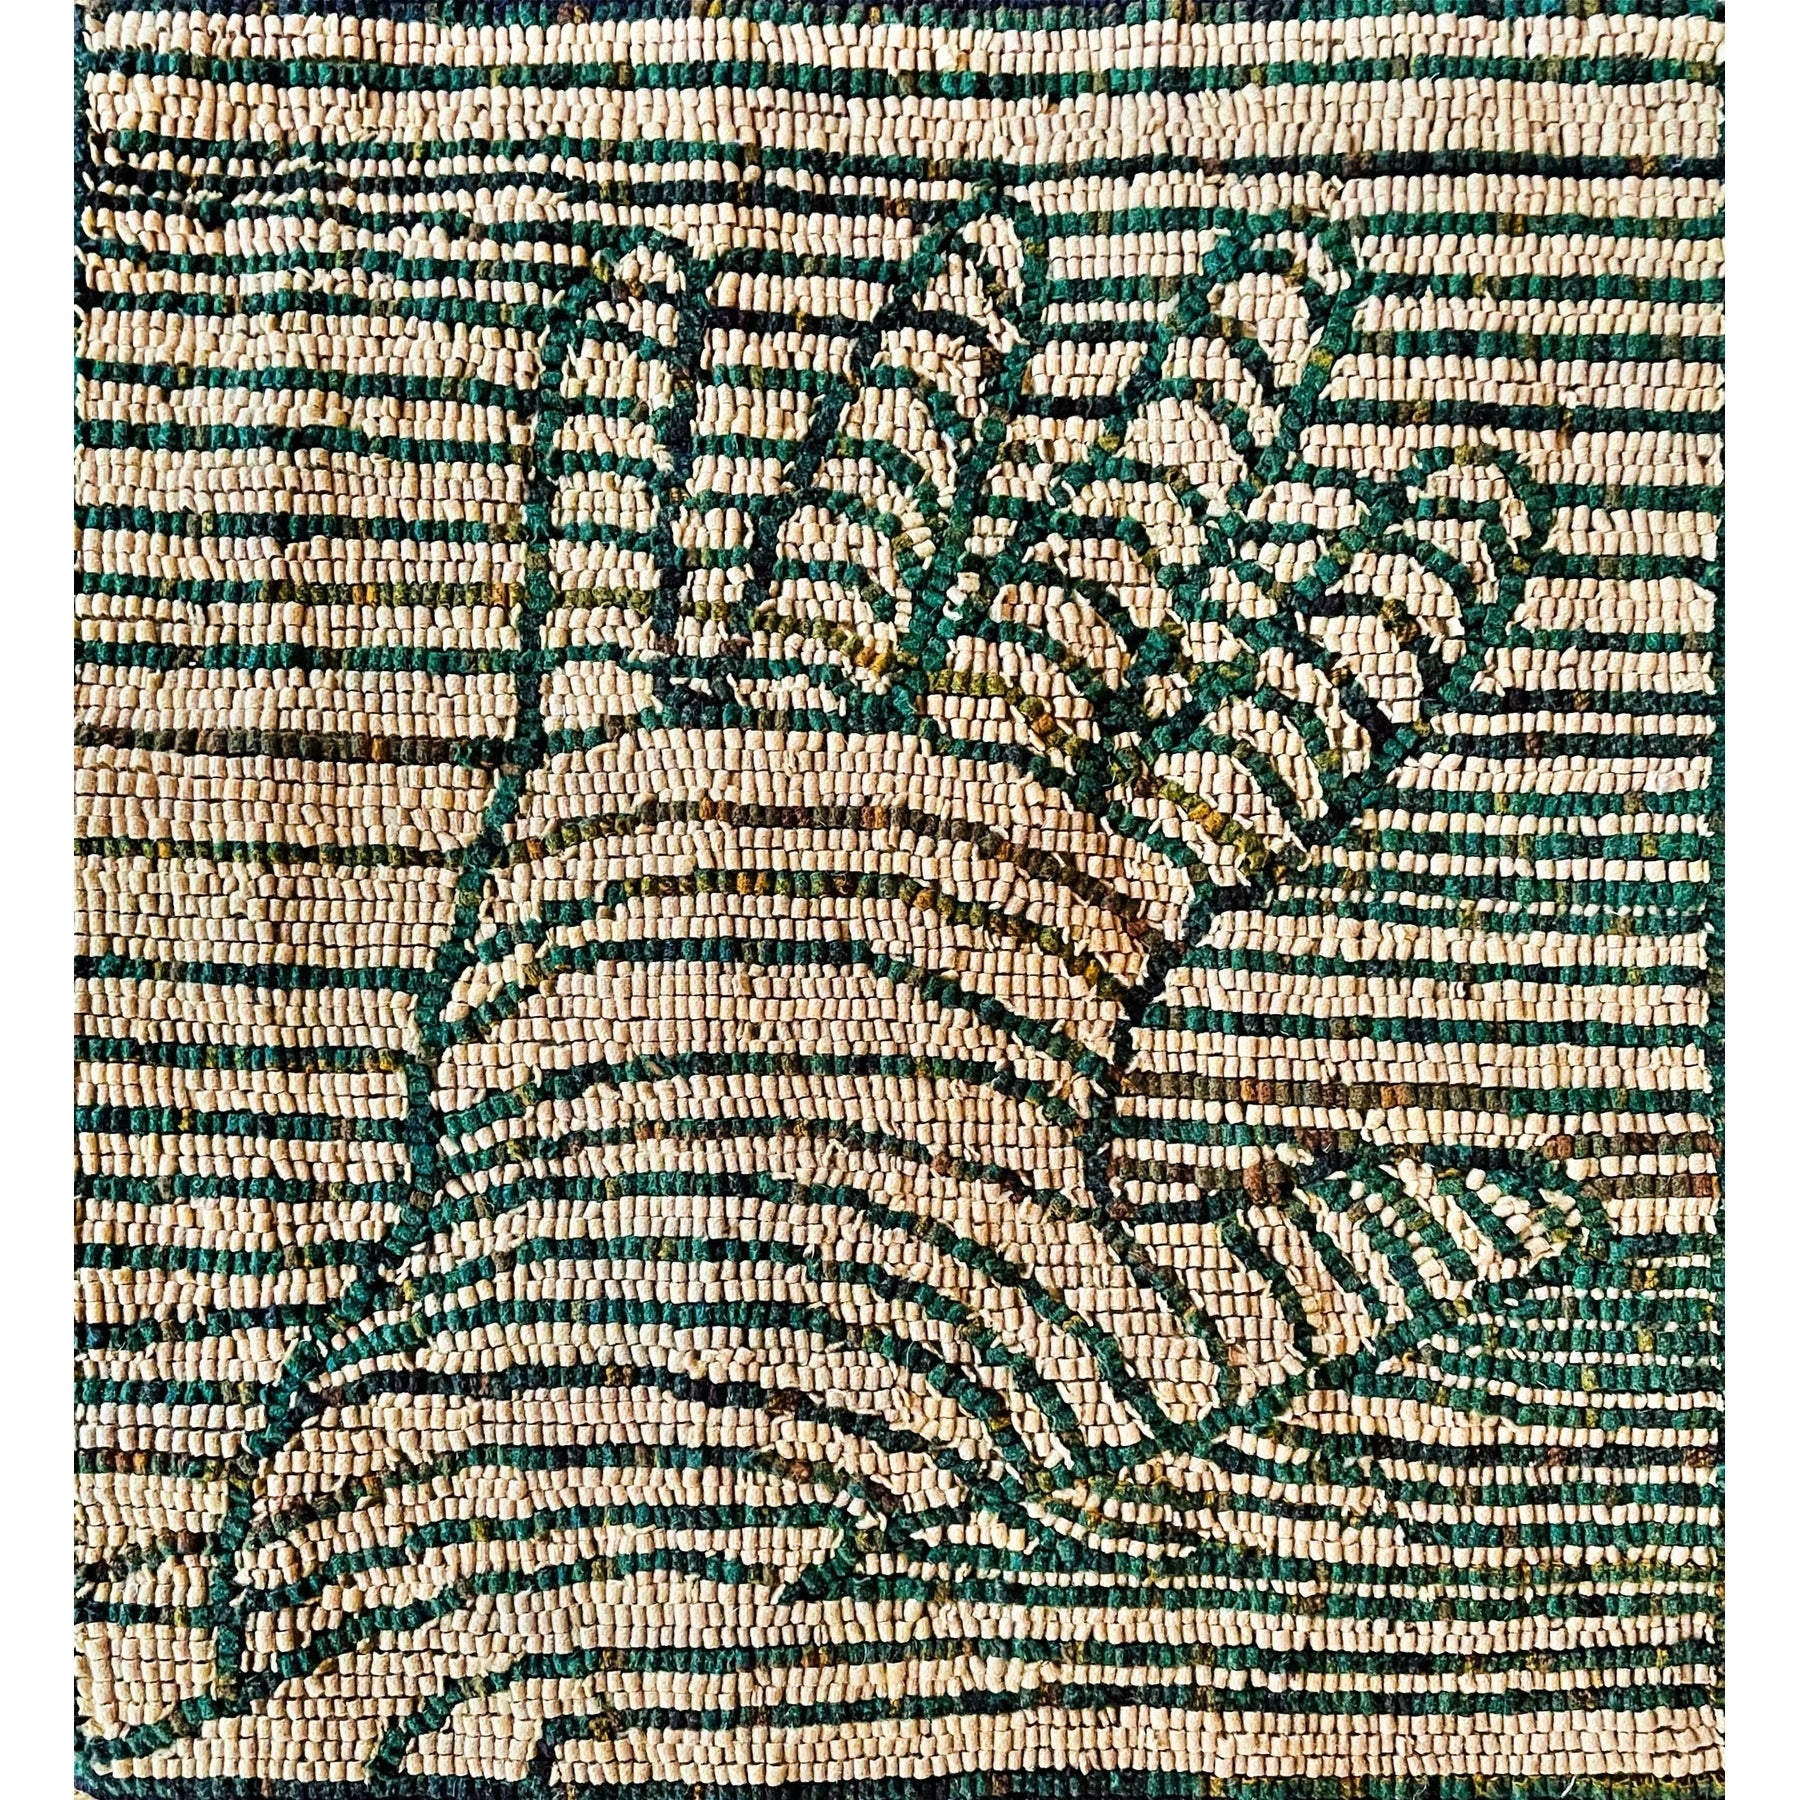 Hit or Miss Hand, rug hooked by Sarah Owens